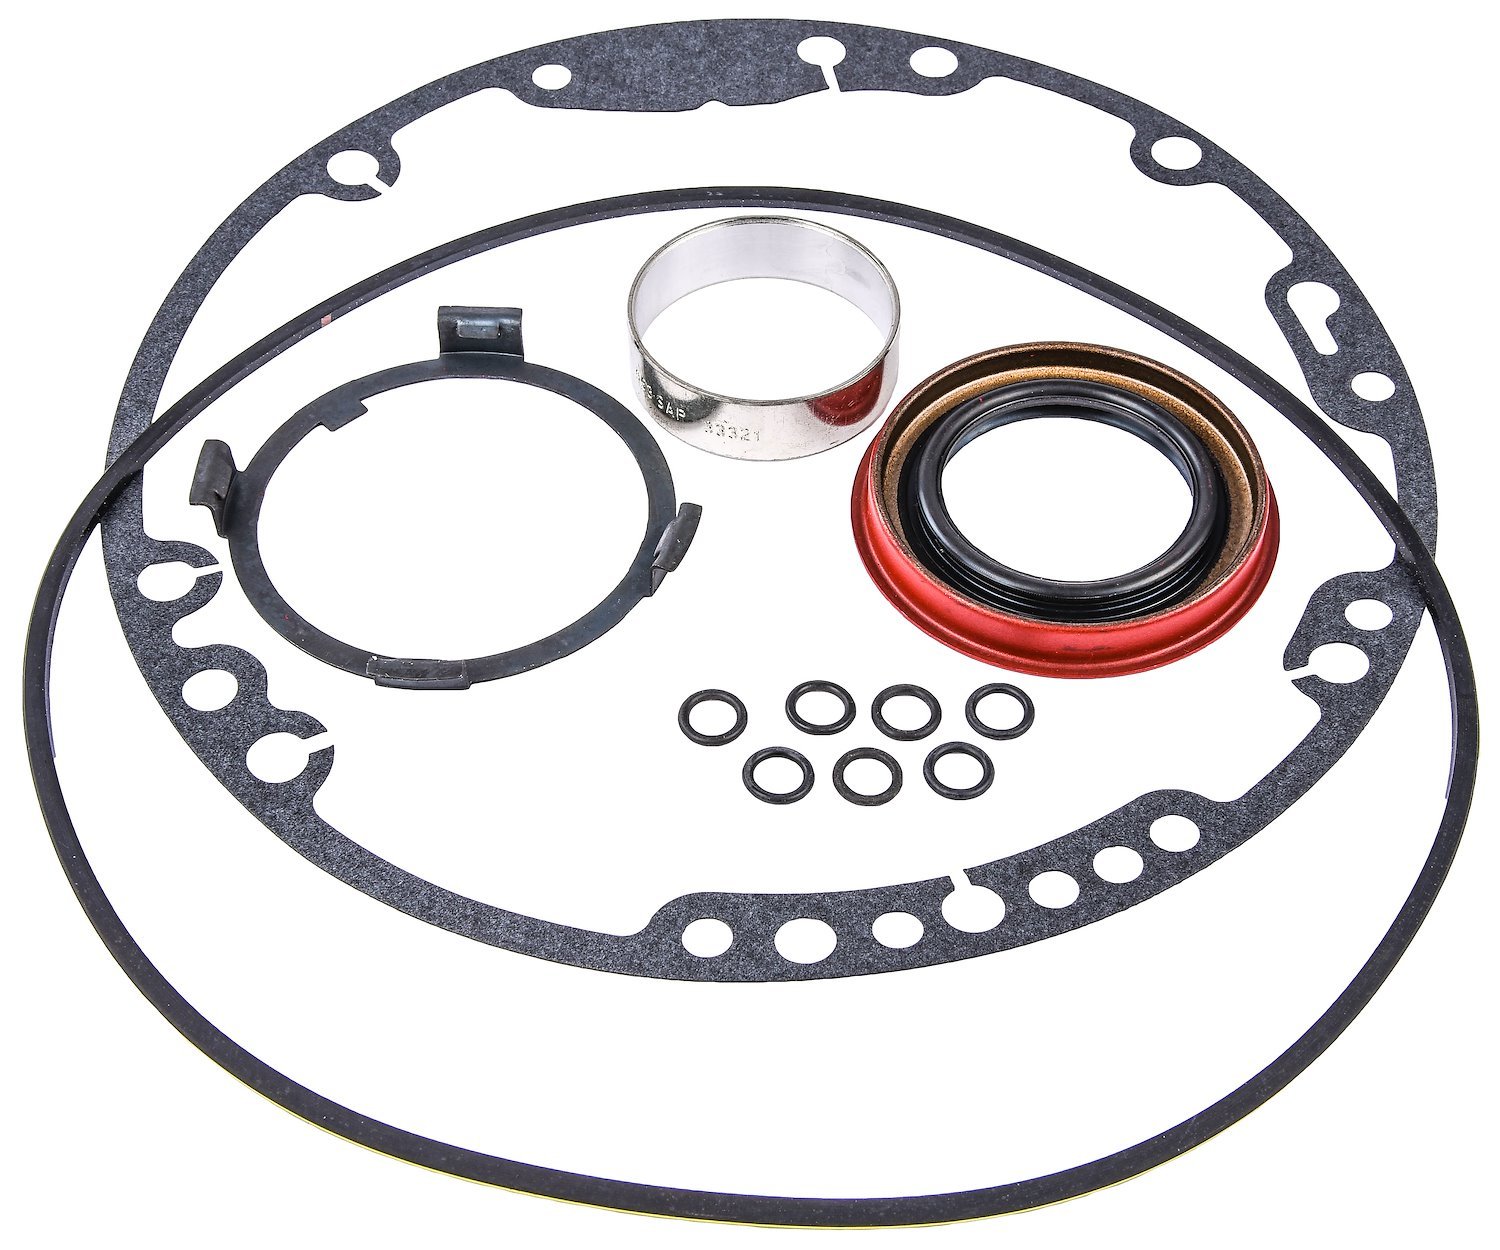 Front Pump Seal Kit for 1983-2003 GM TH700R4 and 4L60E